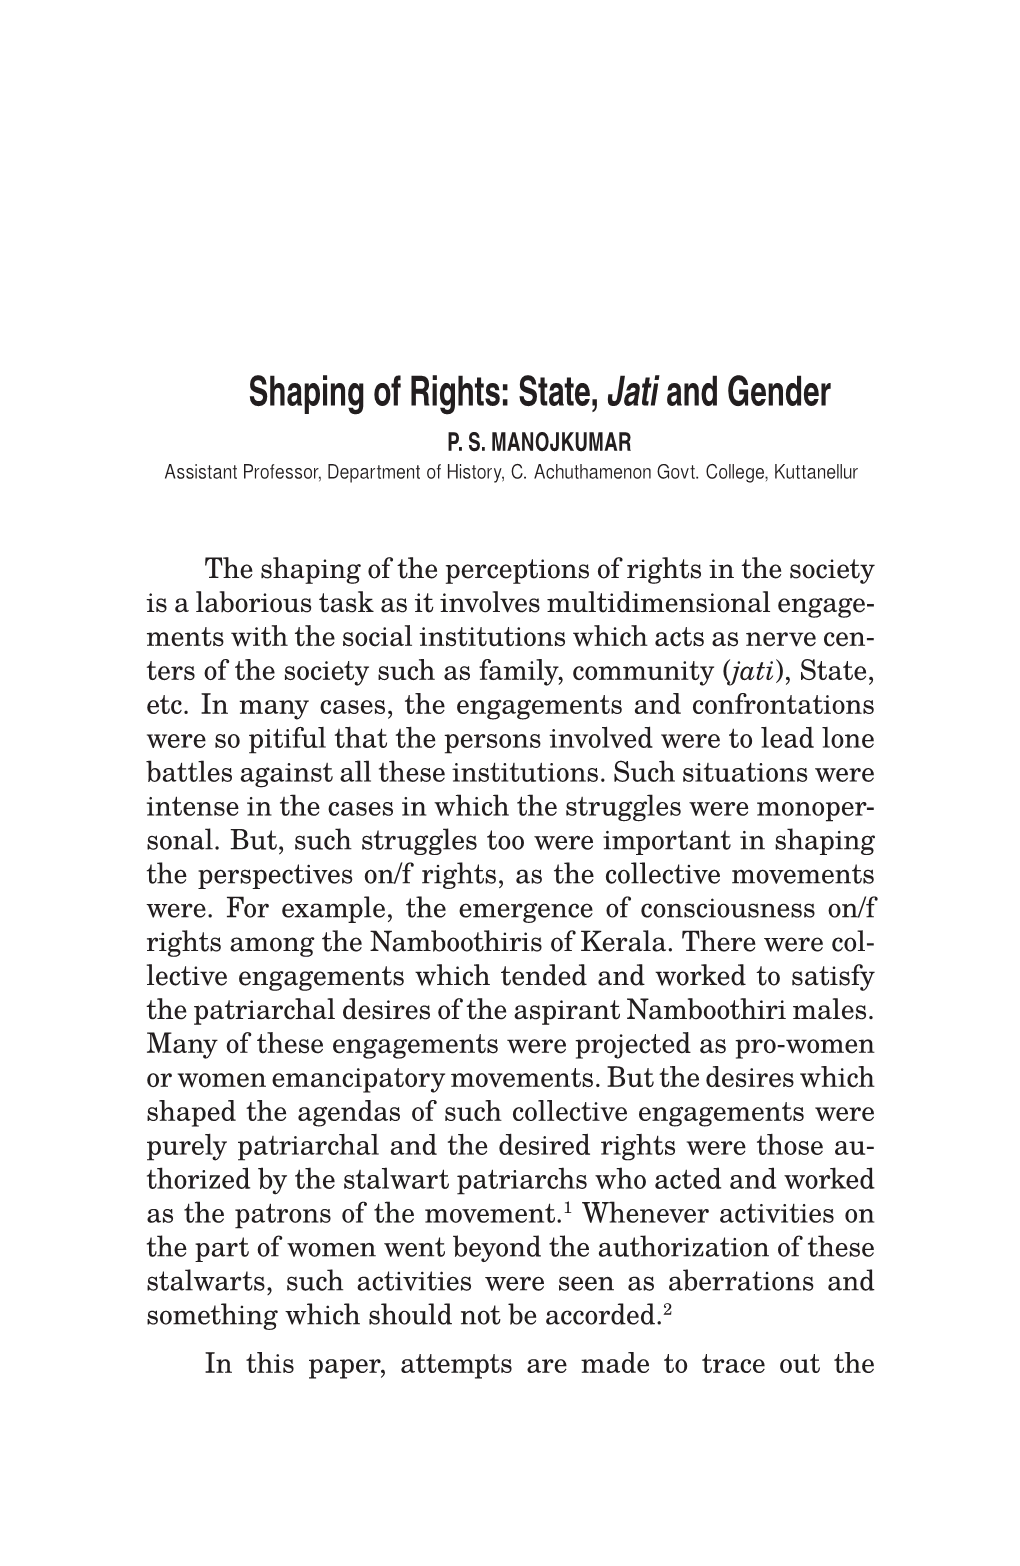 Shaping of Rights: State, Jati and Gender P